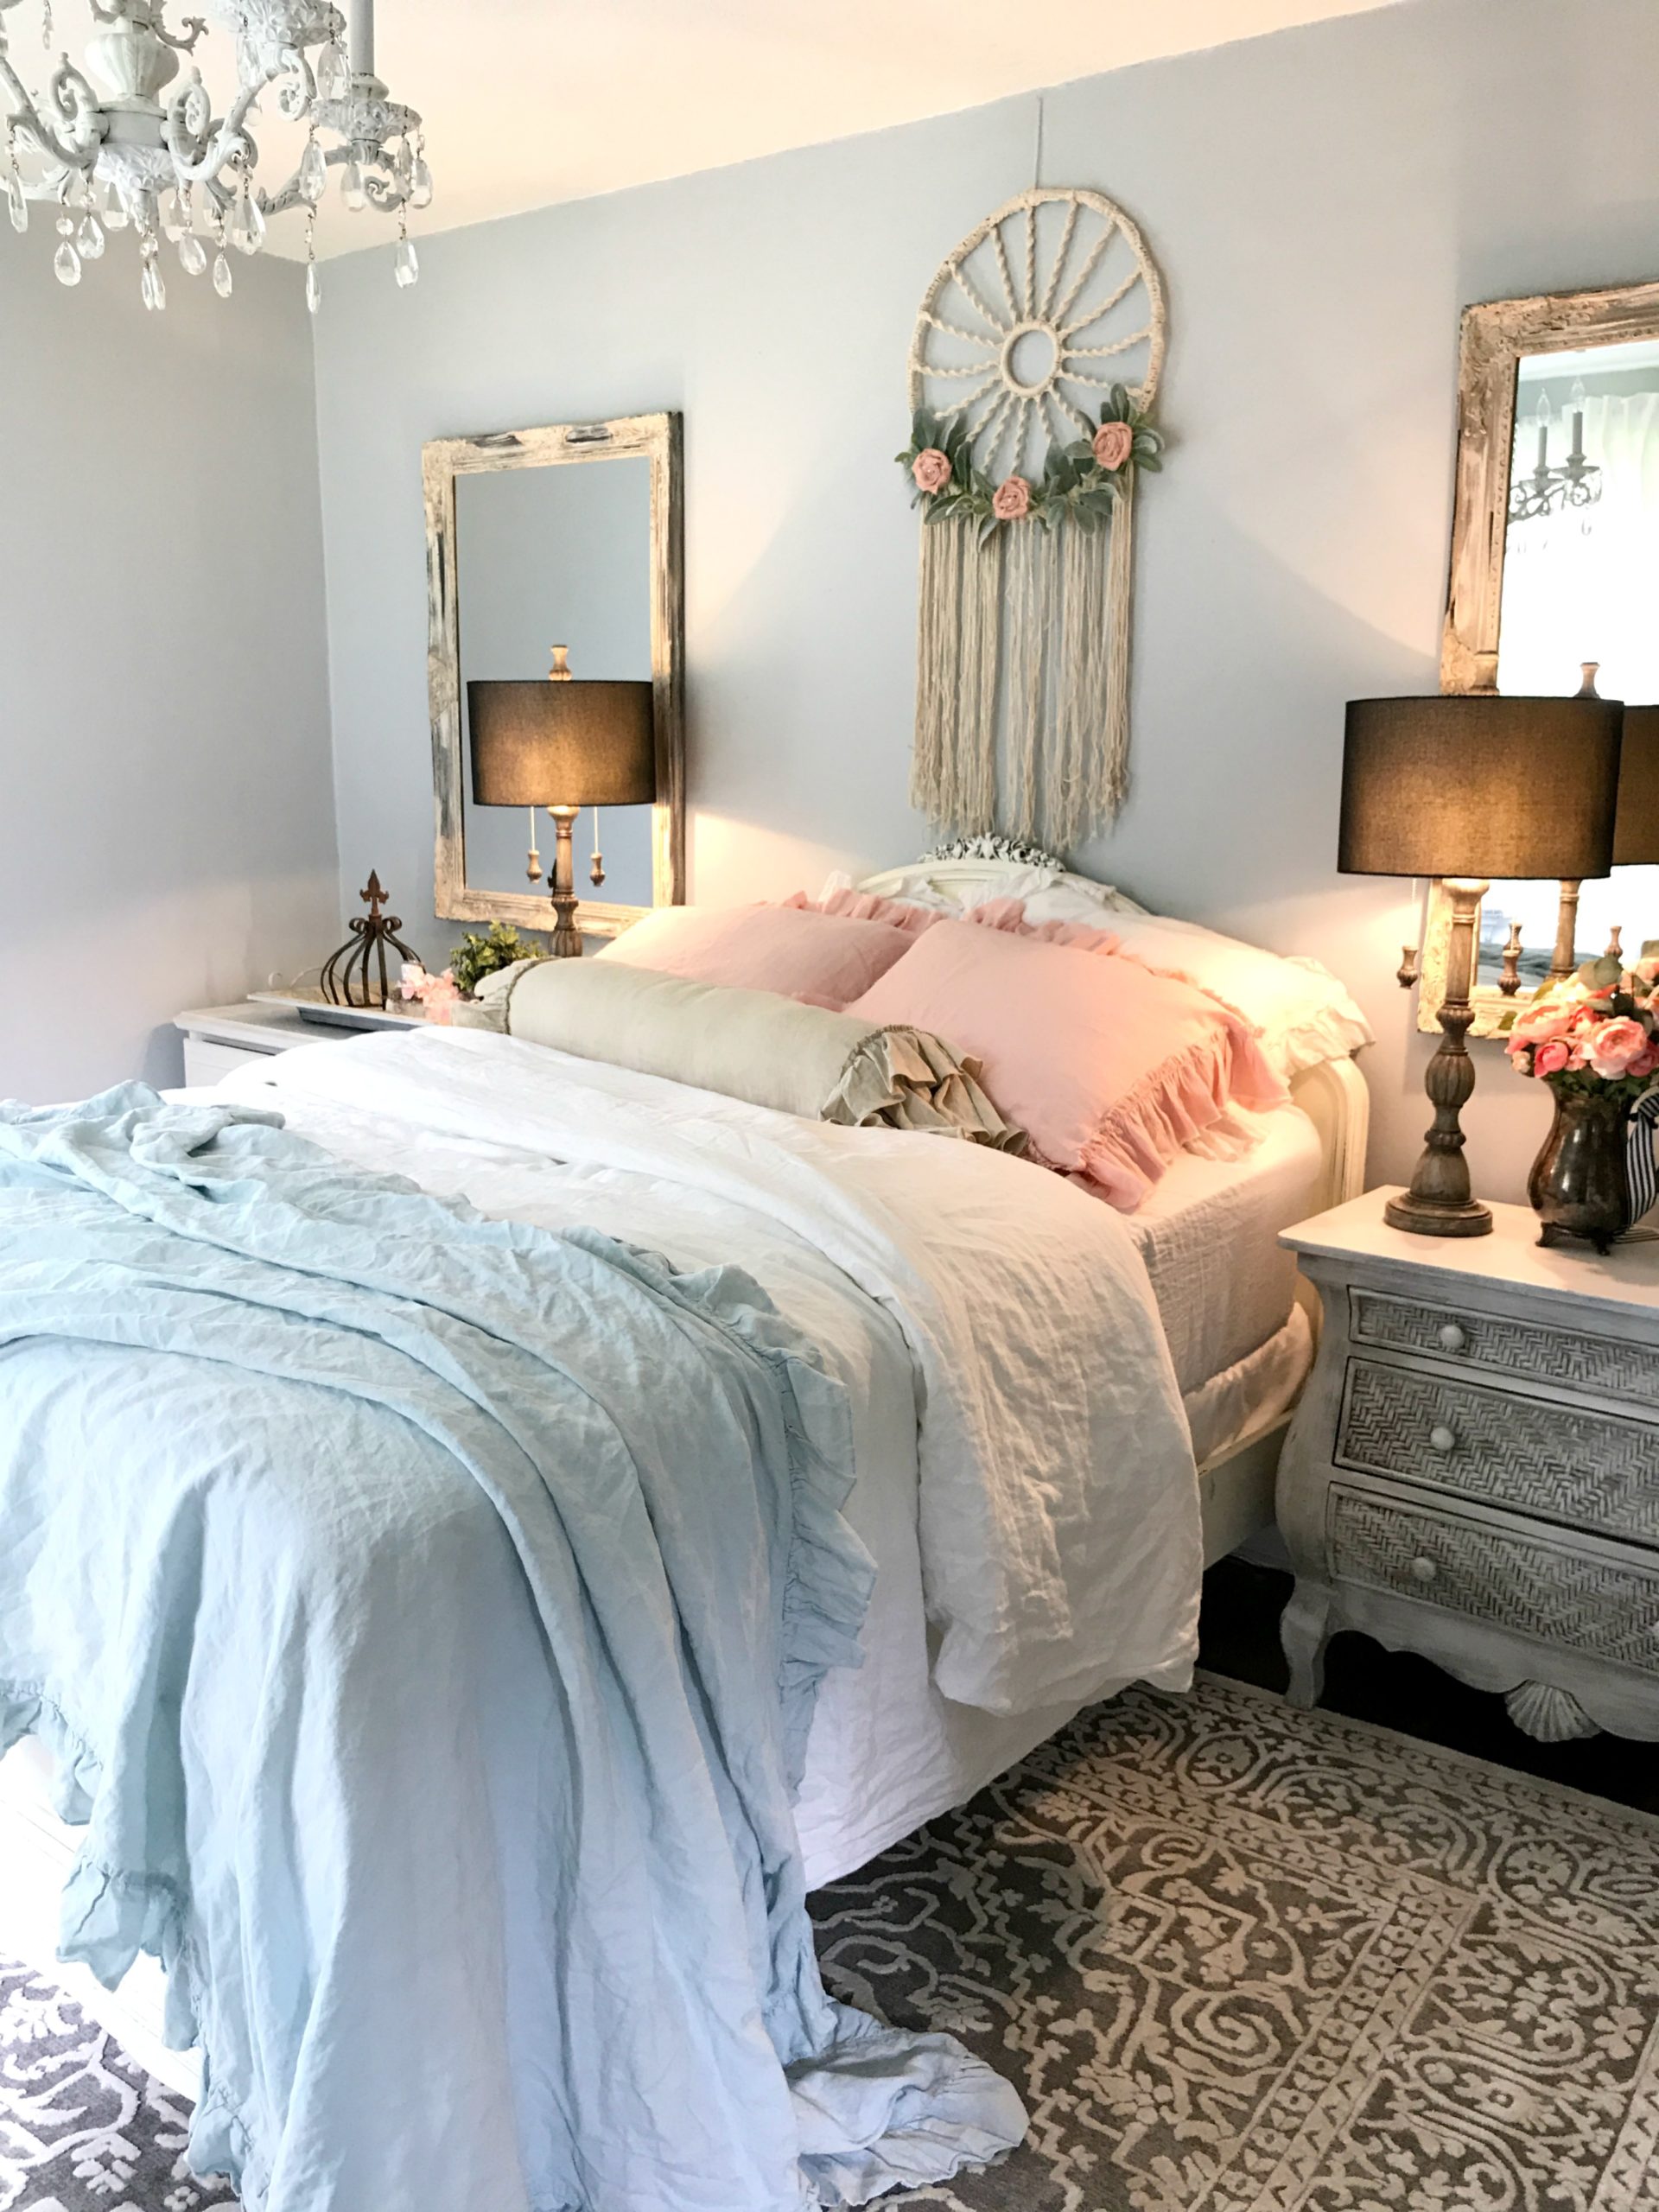 My Daughters Shabby Chic Bedroom – Hallstrom Home